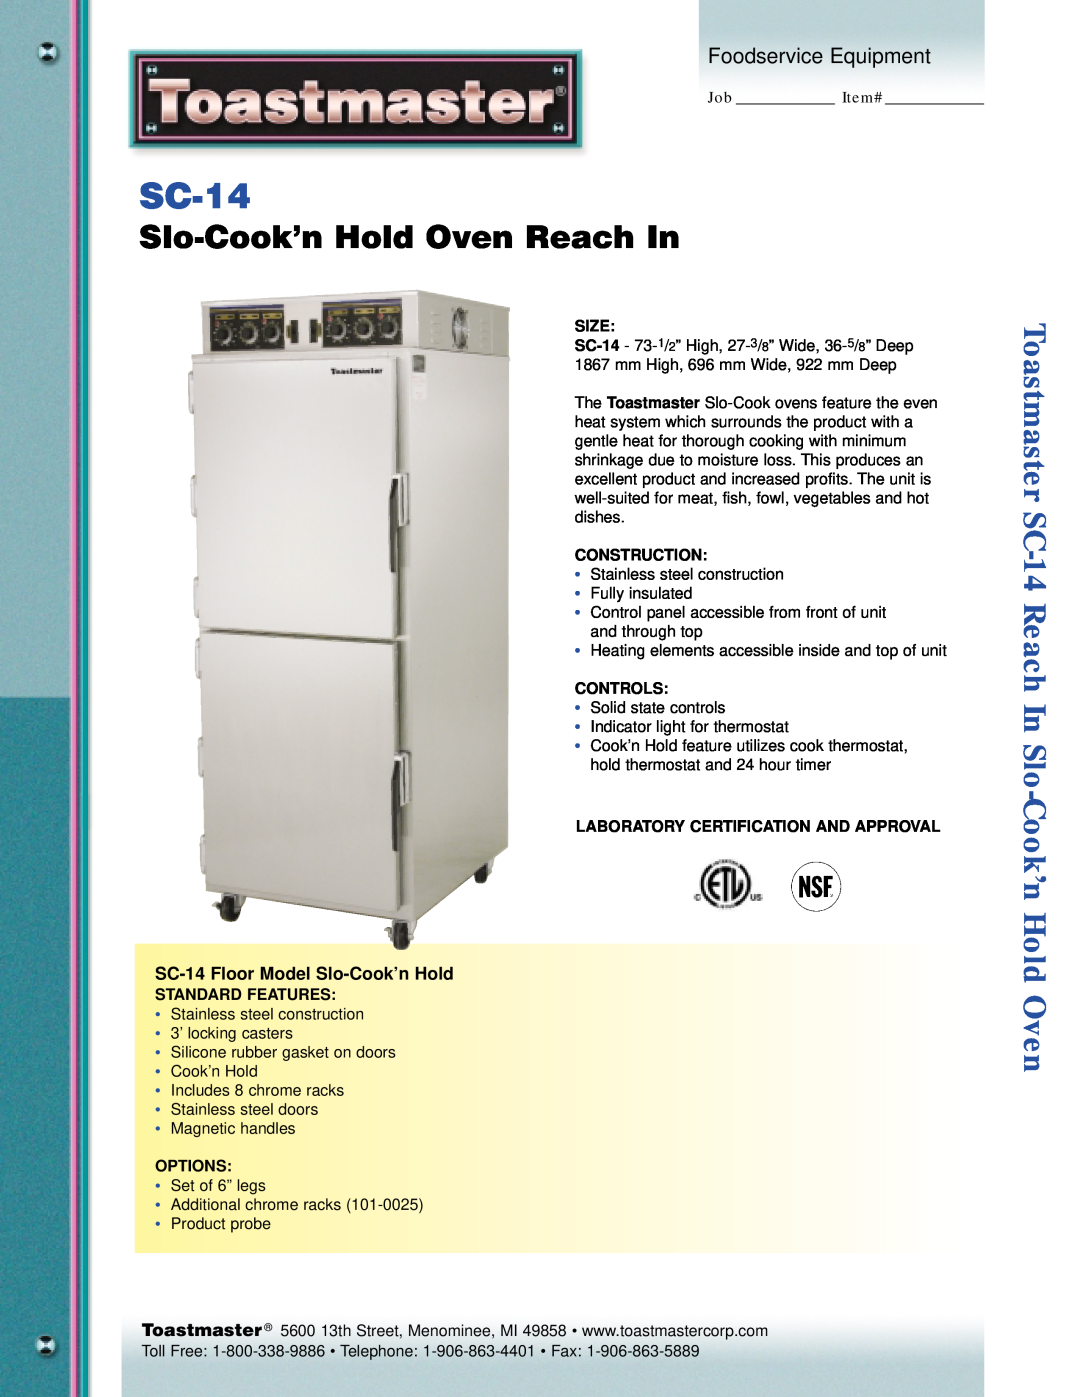 Toastmaster manual Slo-Cook’nHold Oven Reach In, SC-14Floor Model Slo-Cook’nHold, Foodservice Equipment 